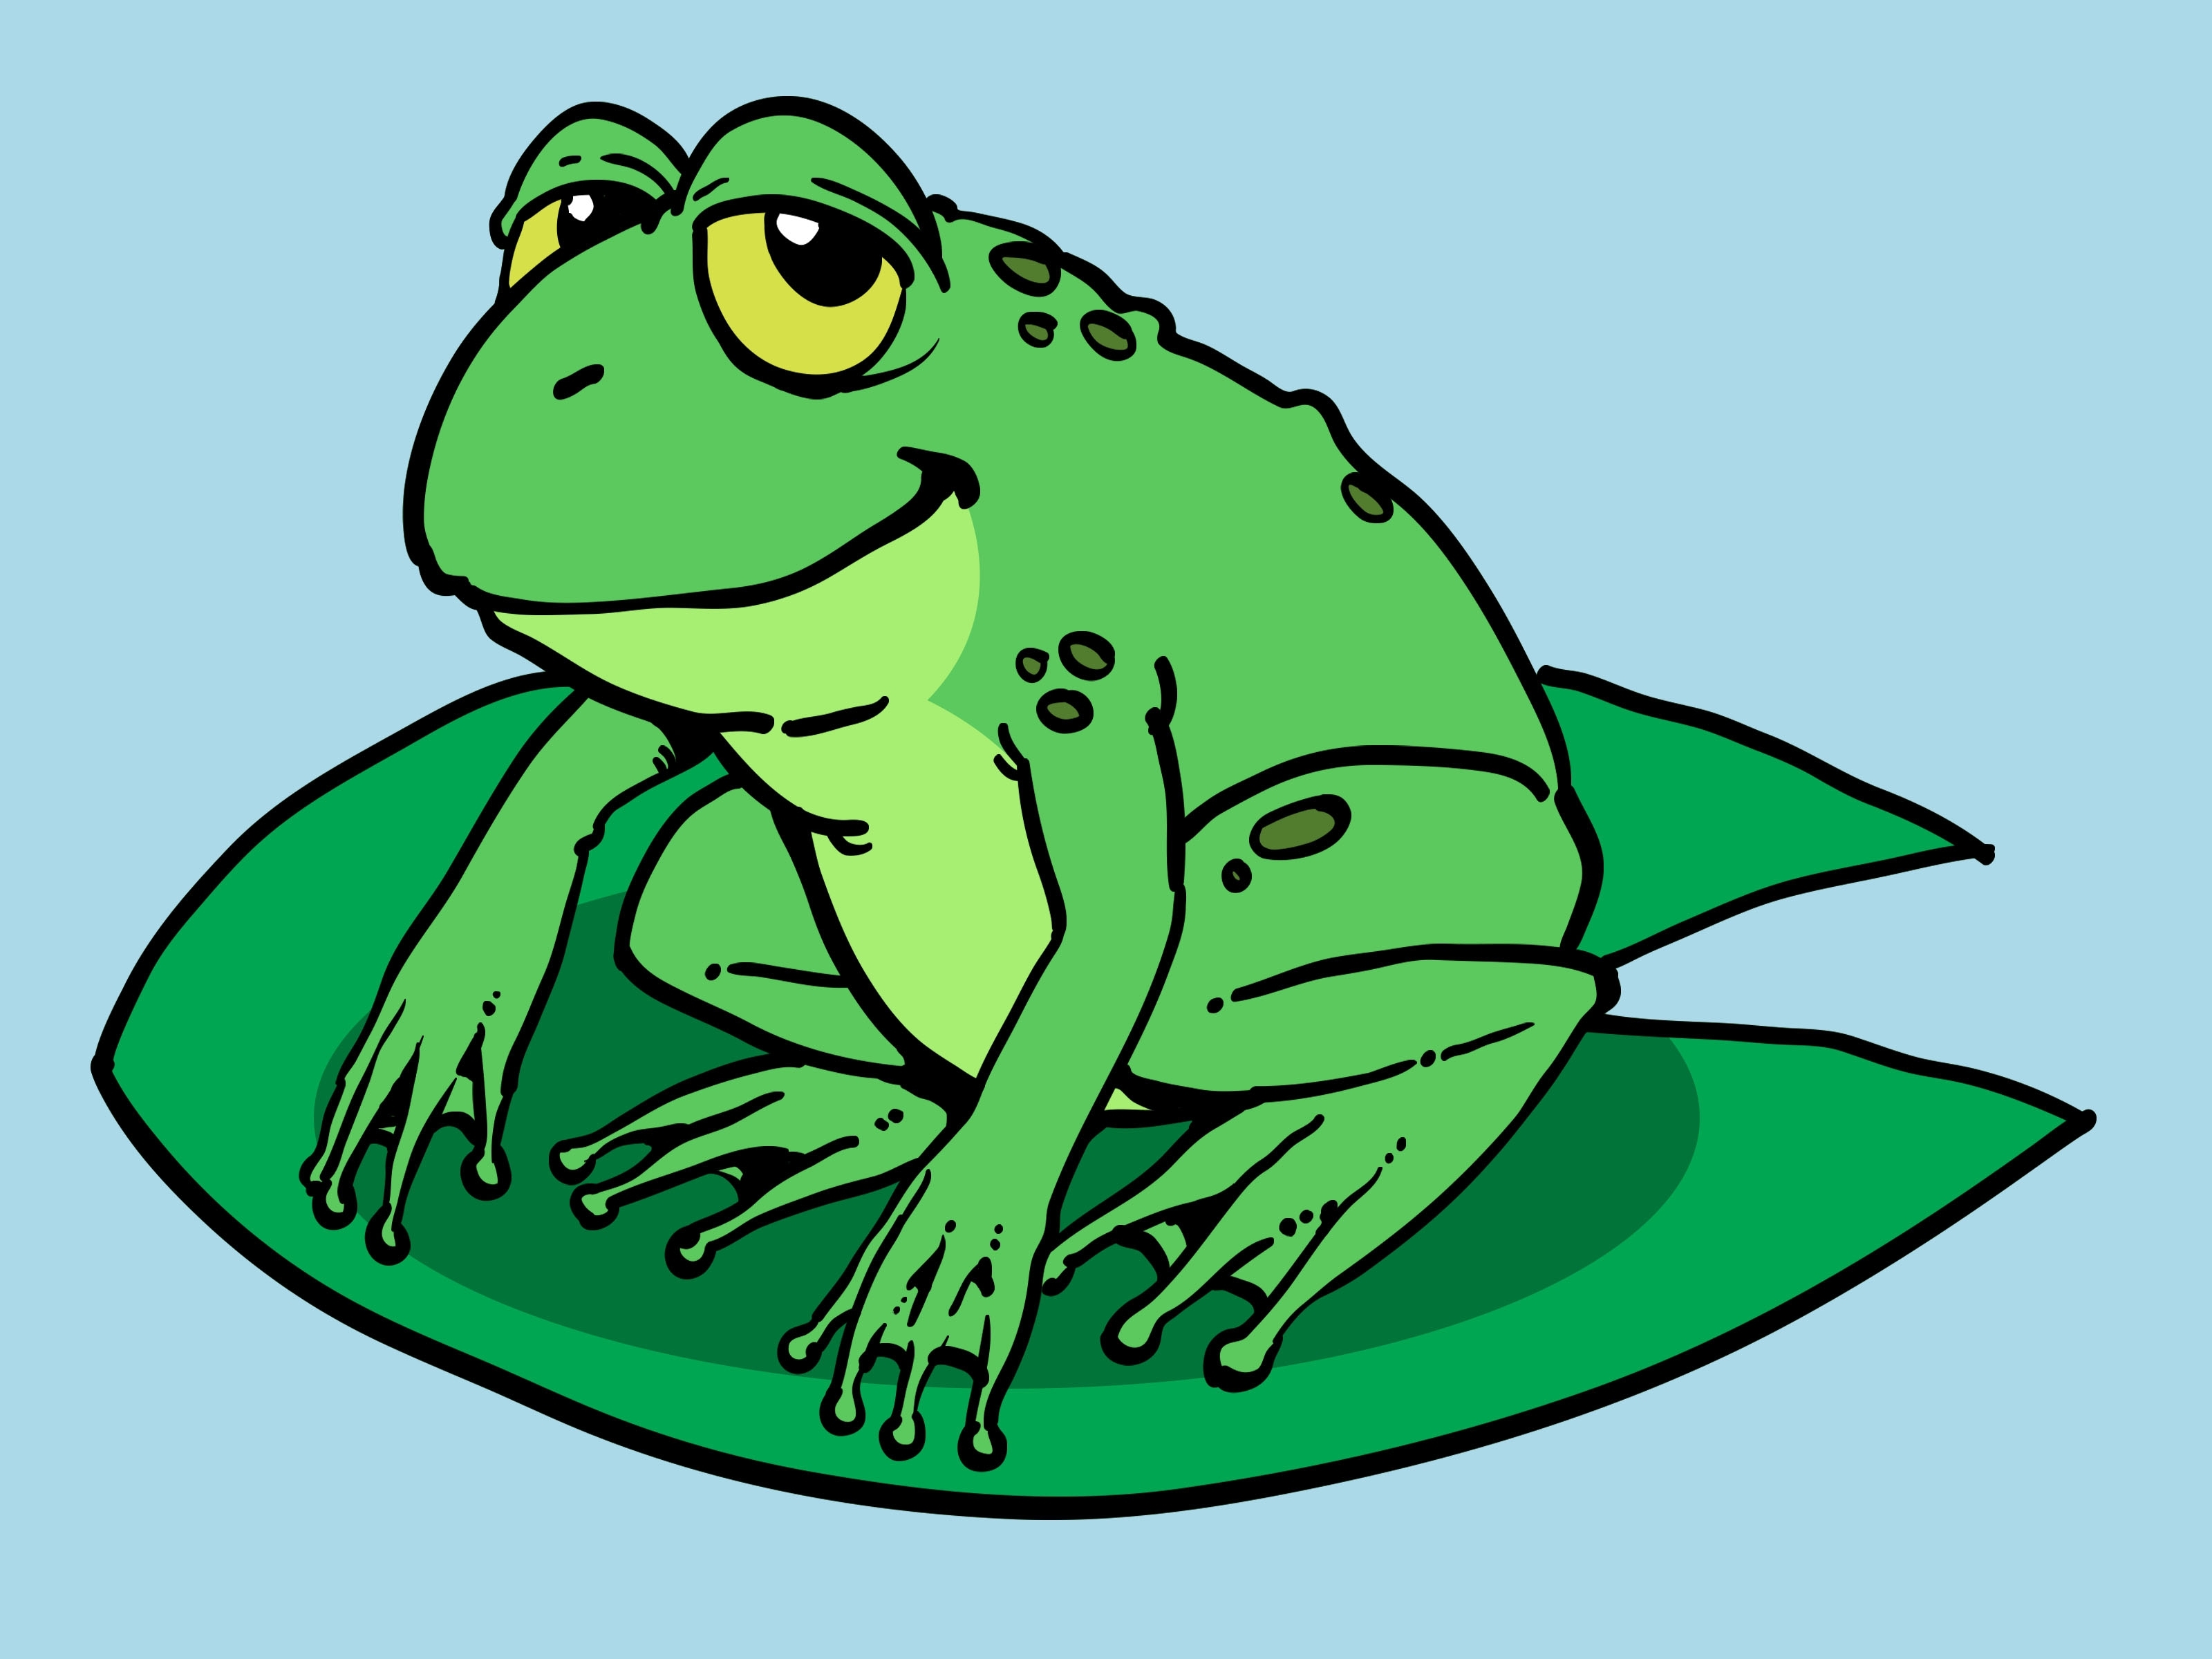 Cartoon Drawings Of Frogs - Drawing And Sketches